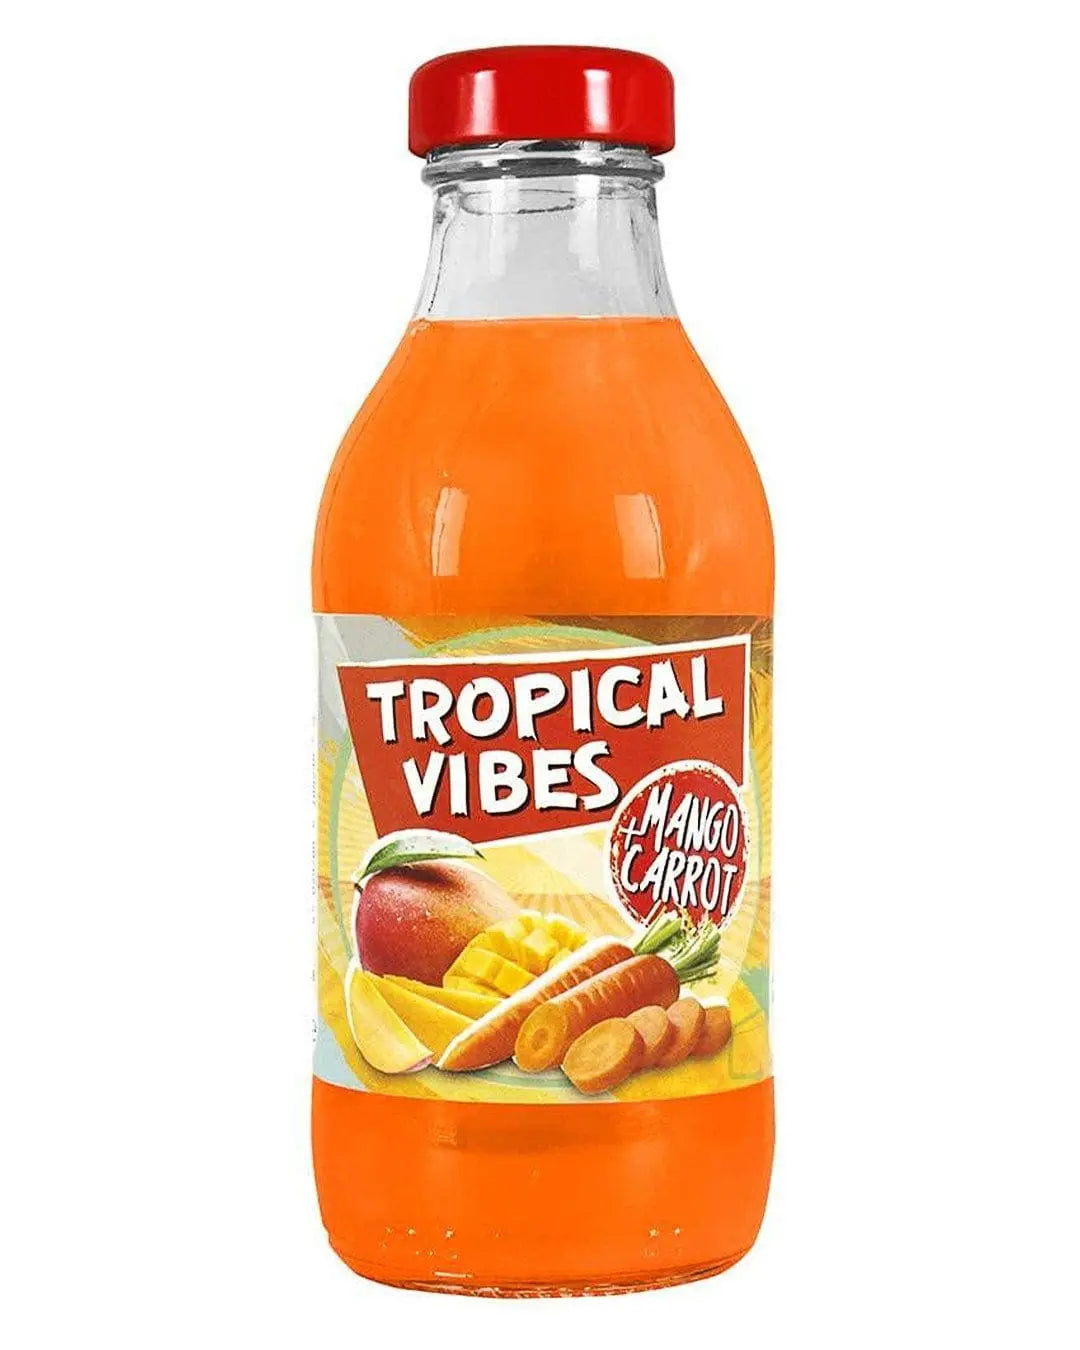 Tropical Vibes Mango Carrot Drink Multipack, 15 x 300 ml Soft Drinks & Mixers